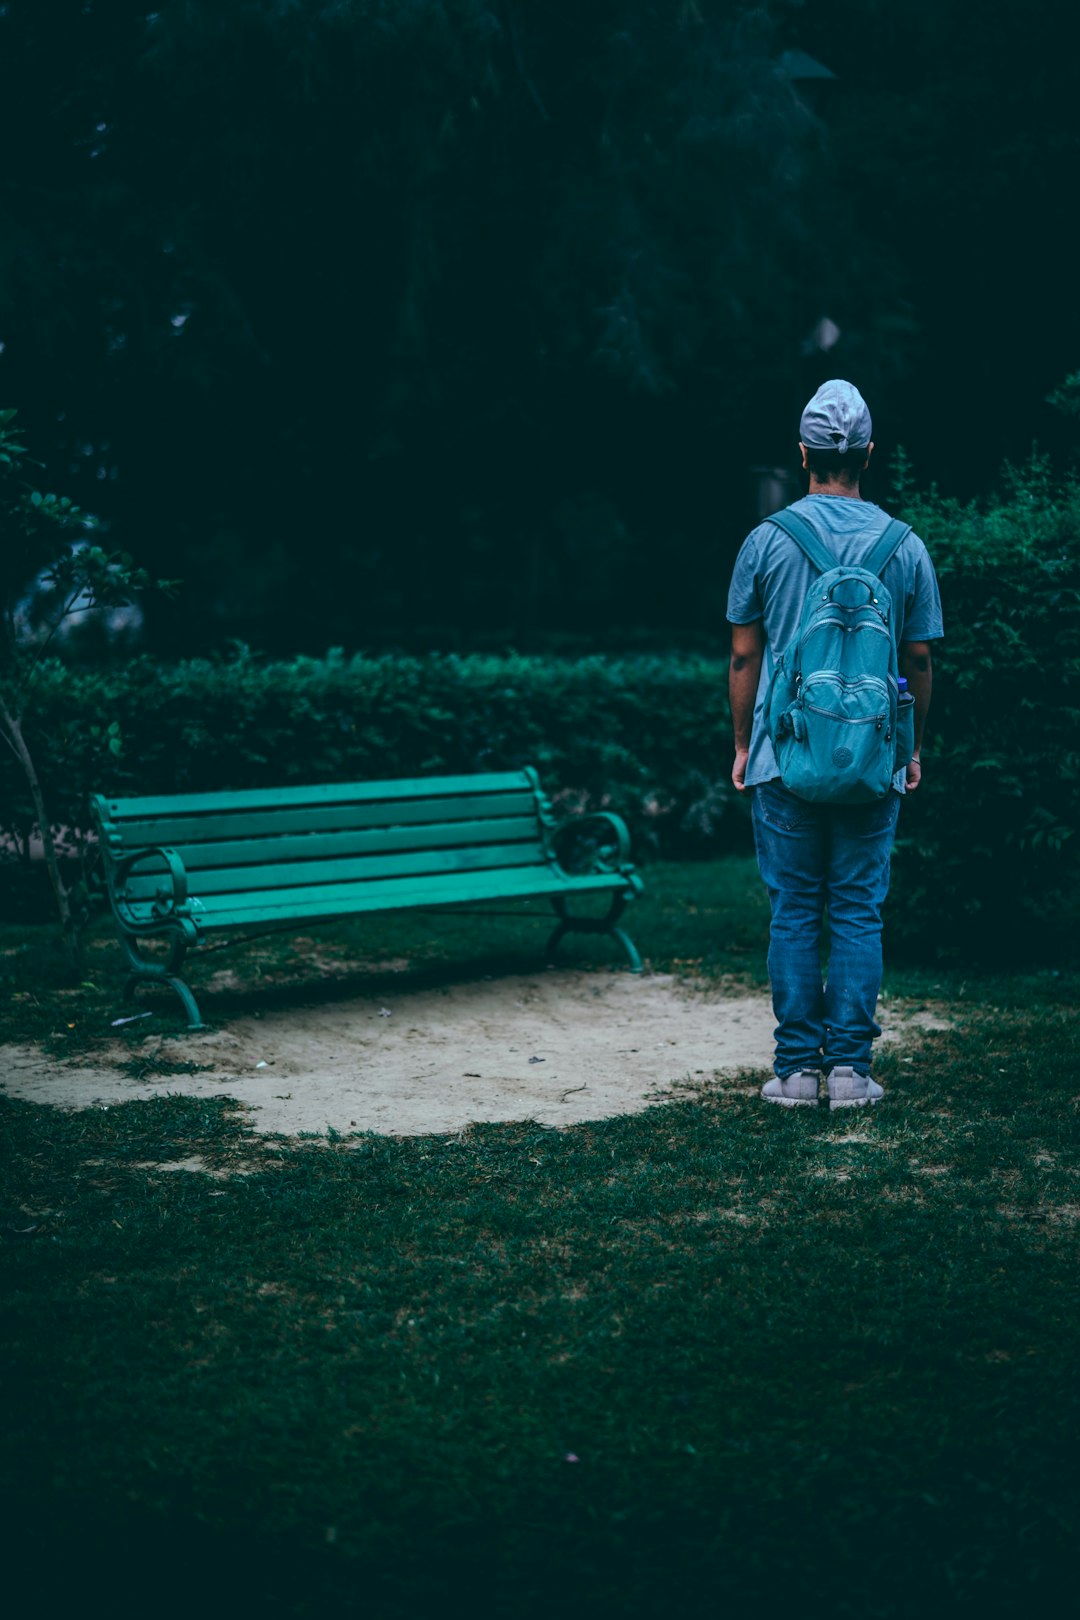 person in teal shirt stands in front of park bench